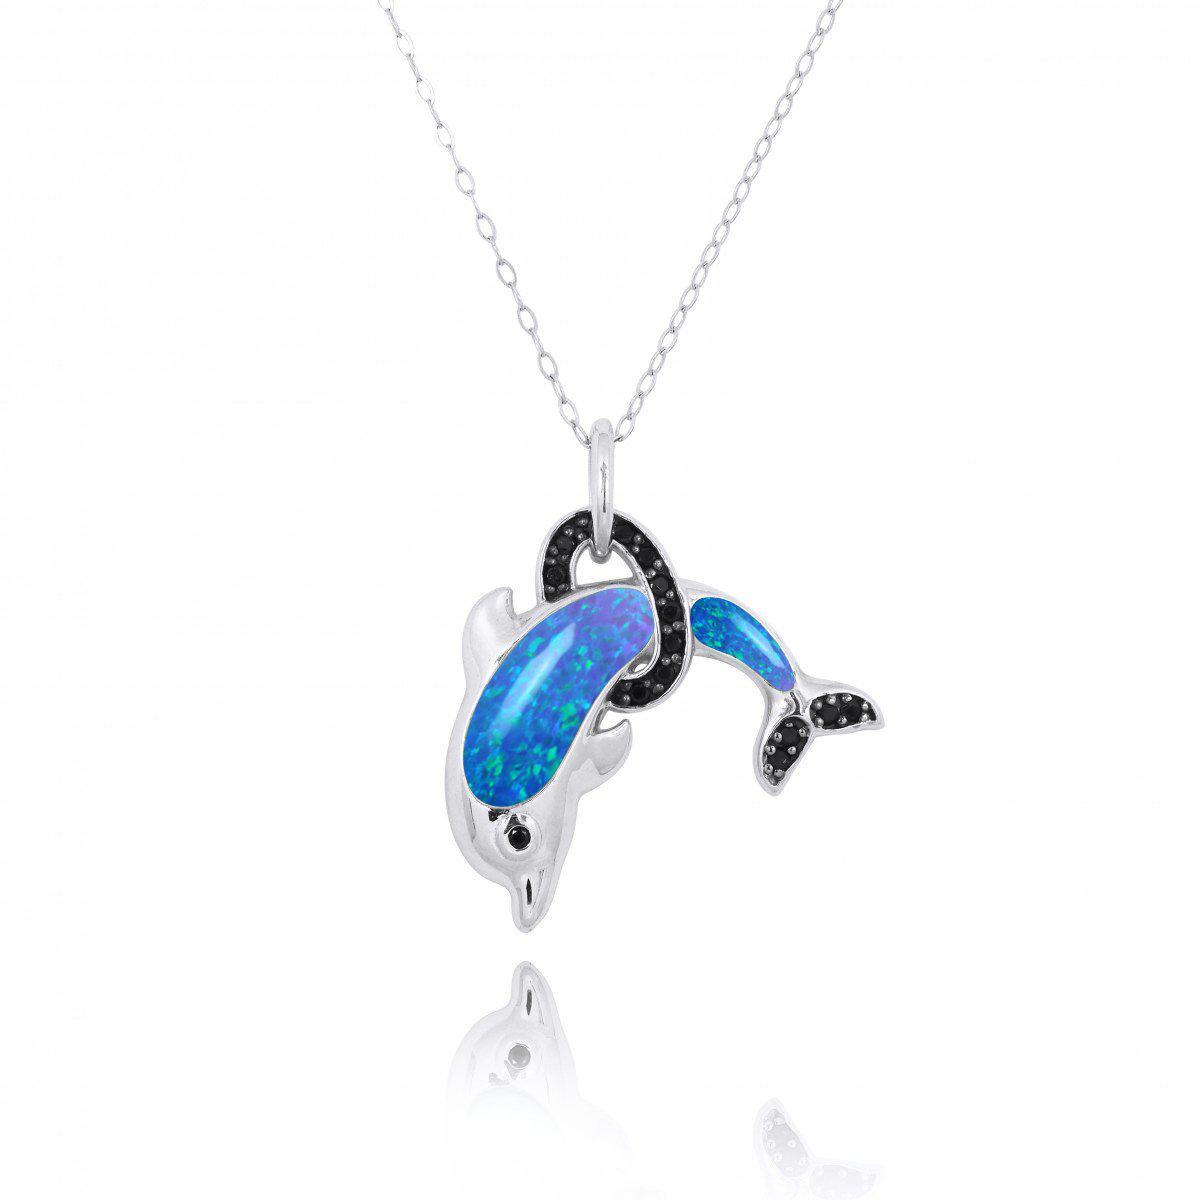 Sterling Silver Dolphin Pendant Necklace with Blue Opal and Black Spinel